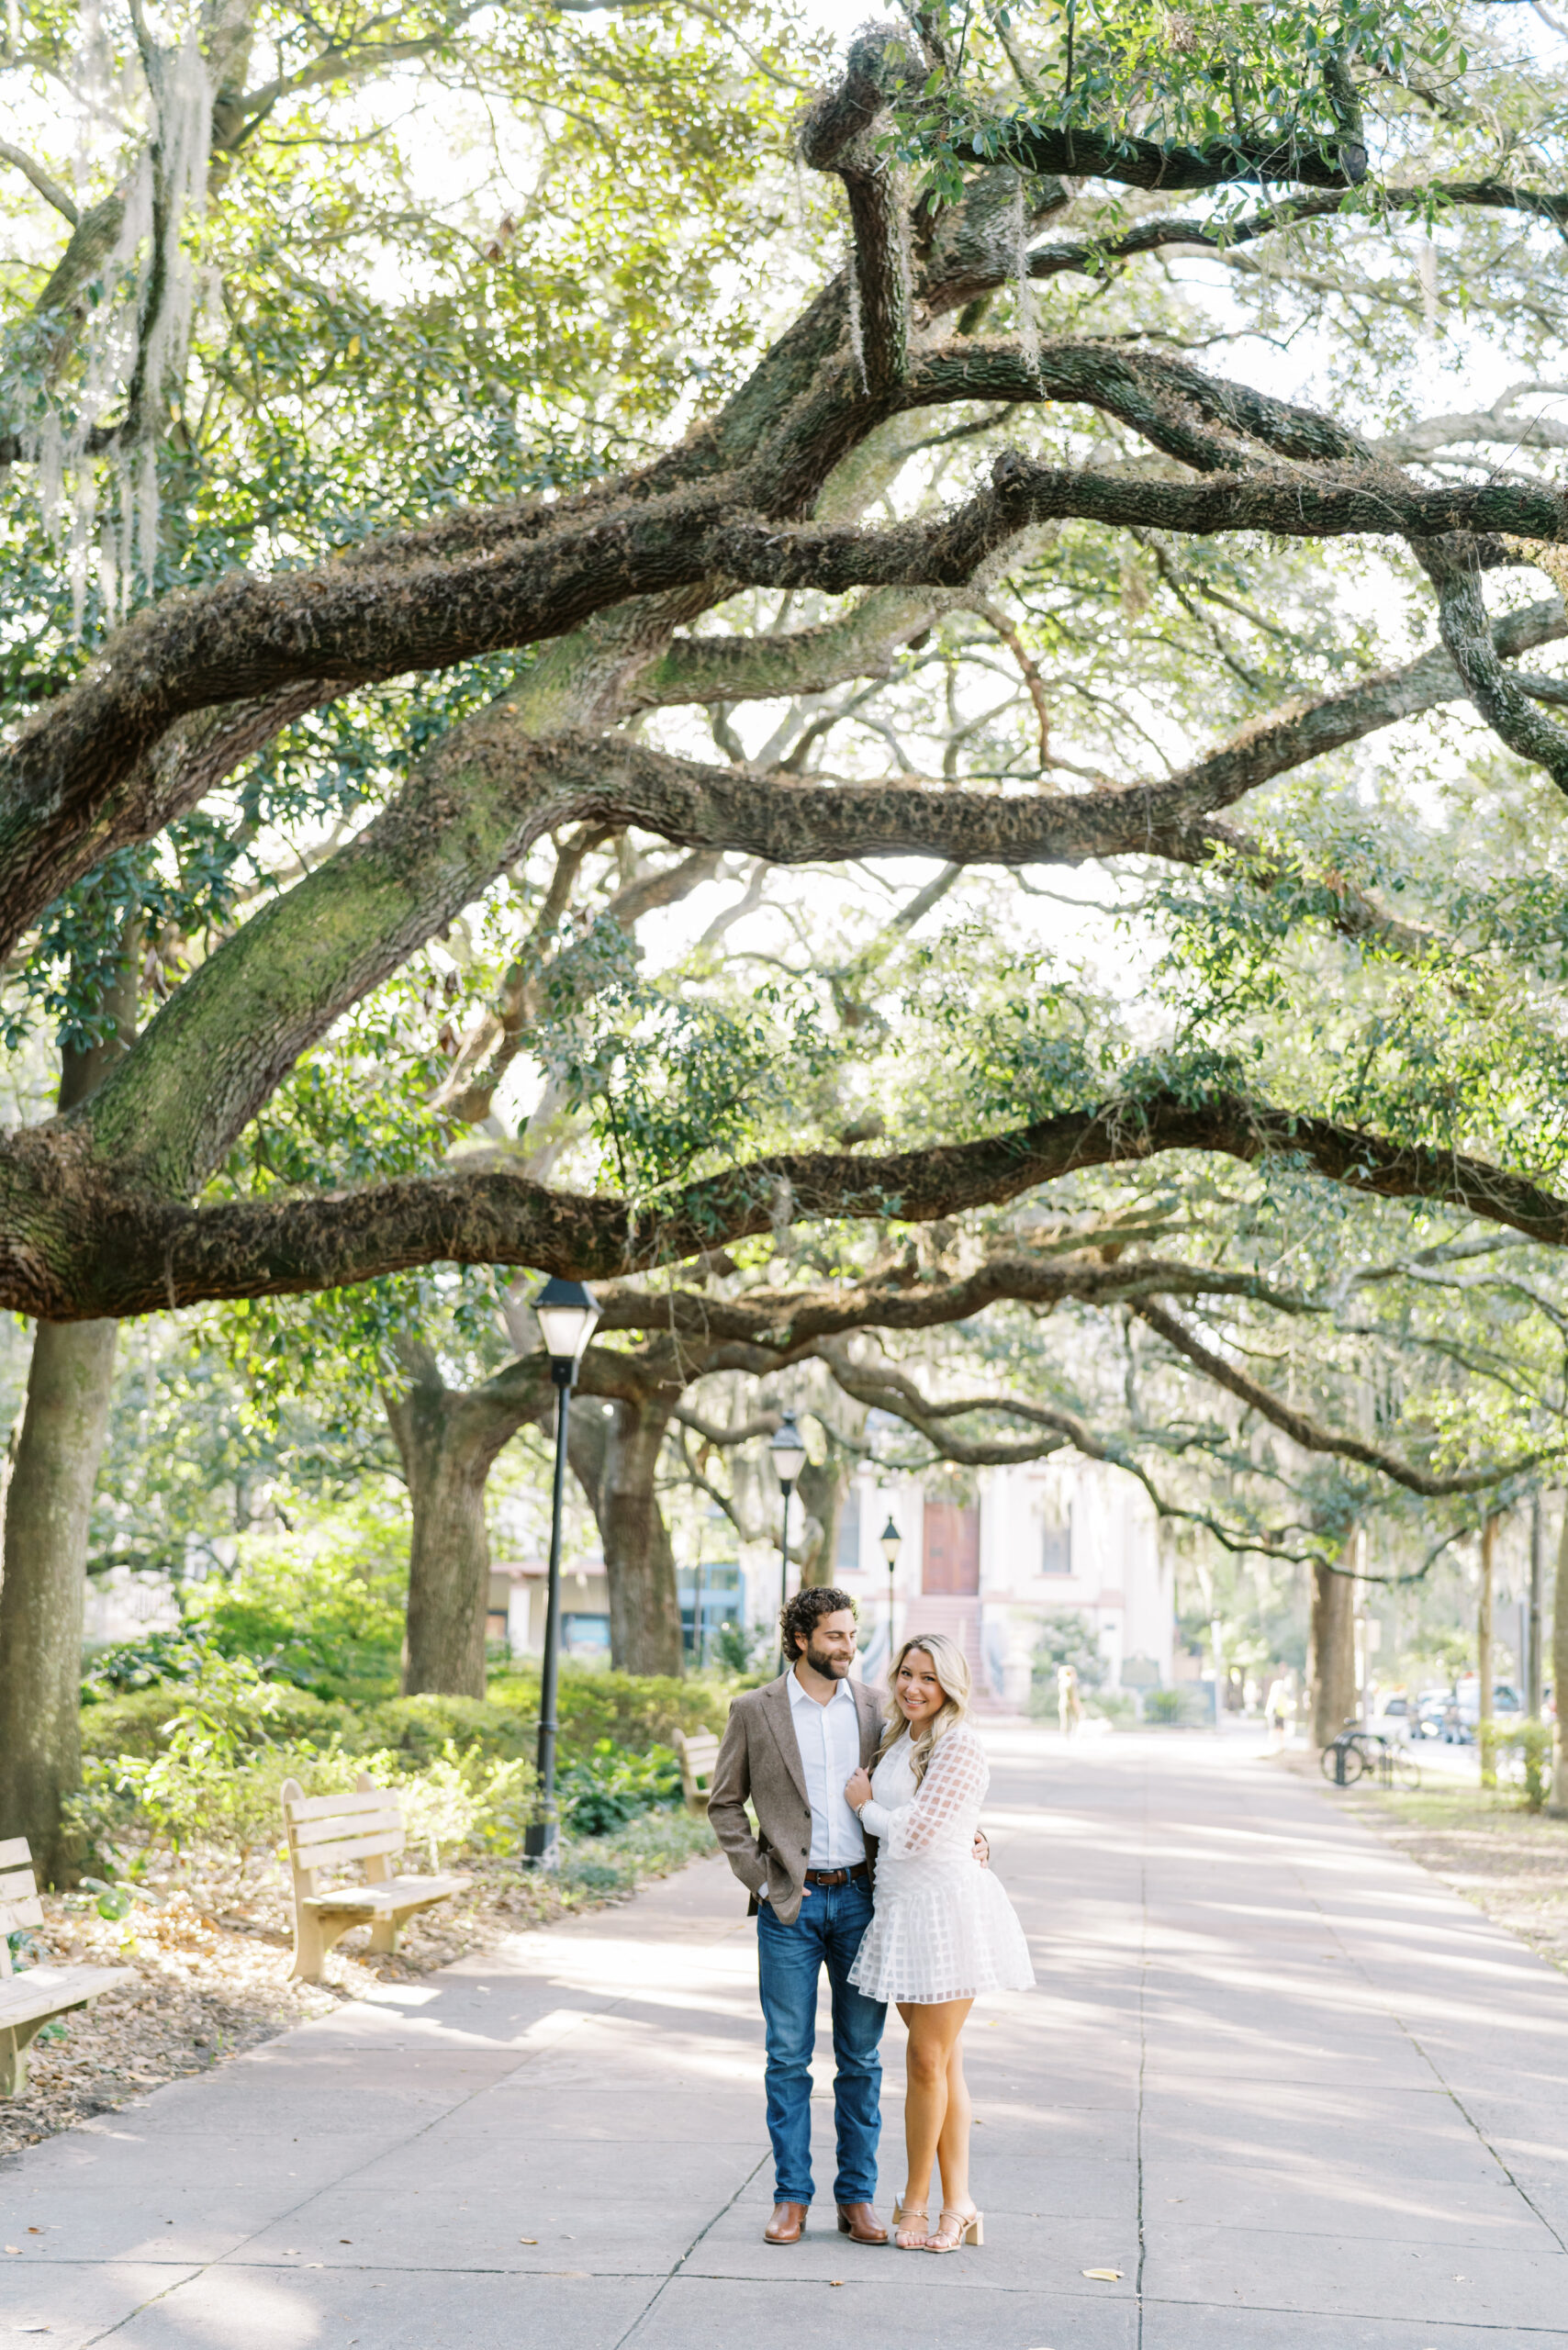 Tips for newly engaged couples getting married in Savannah Ga